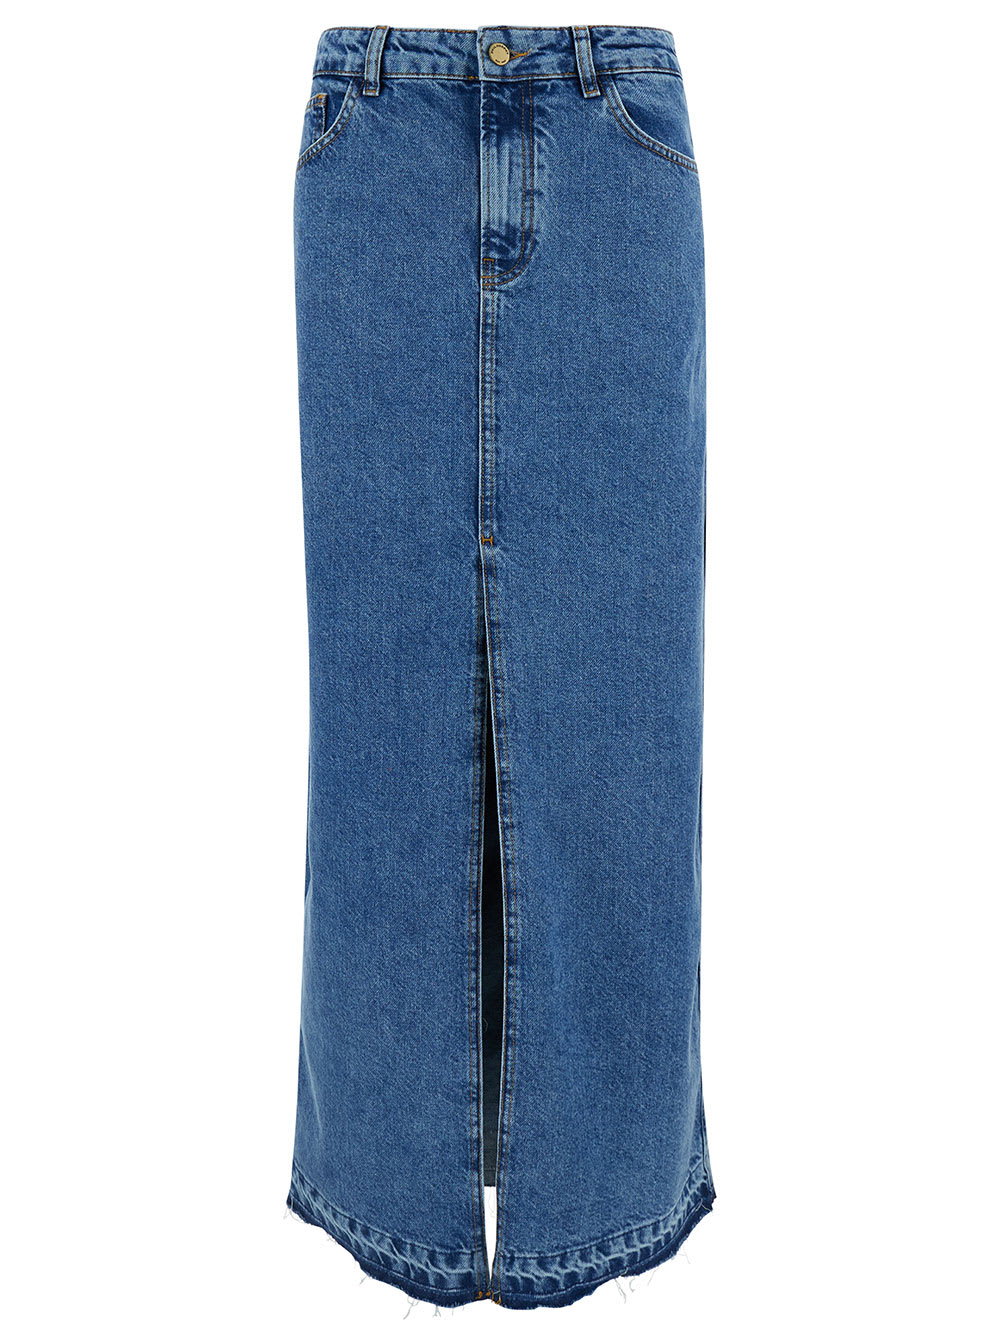 Maxi Light Blue Skirt With Split And Logo Embroidery In Cotton Blend Denim Woman